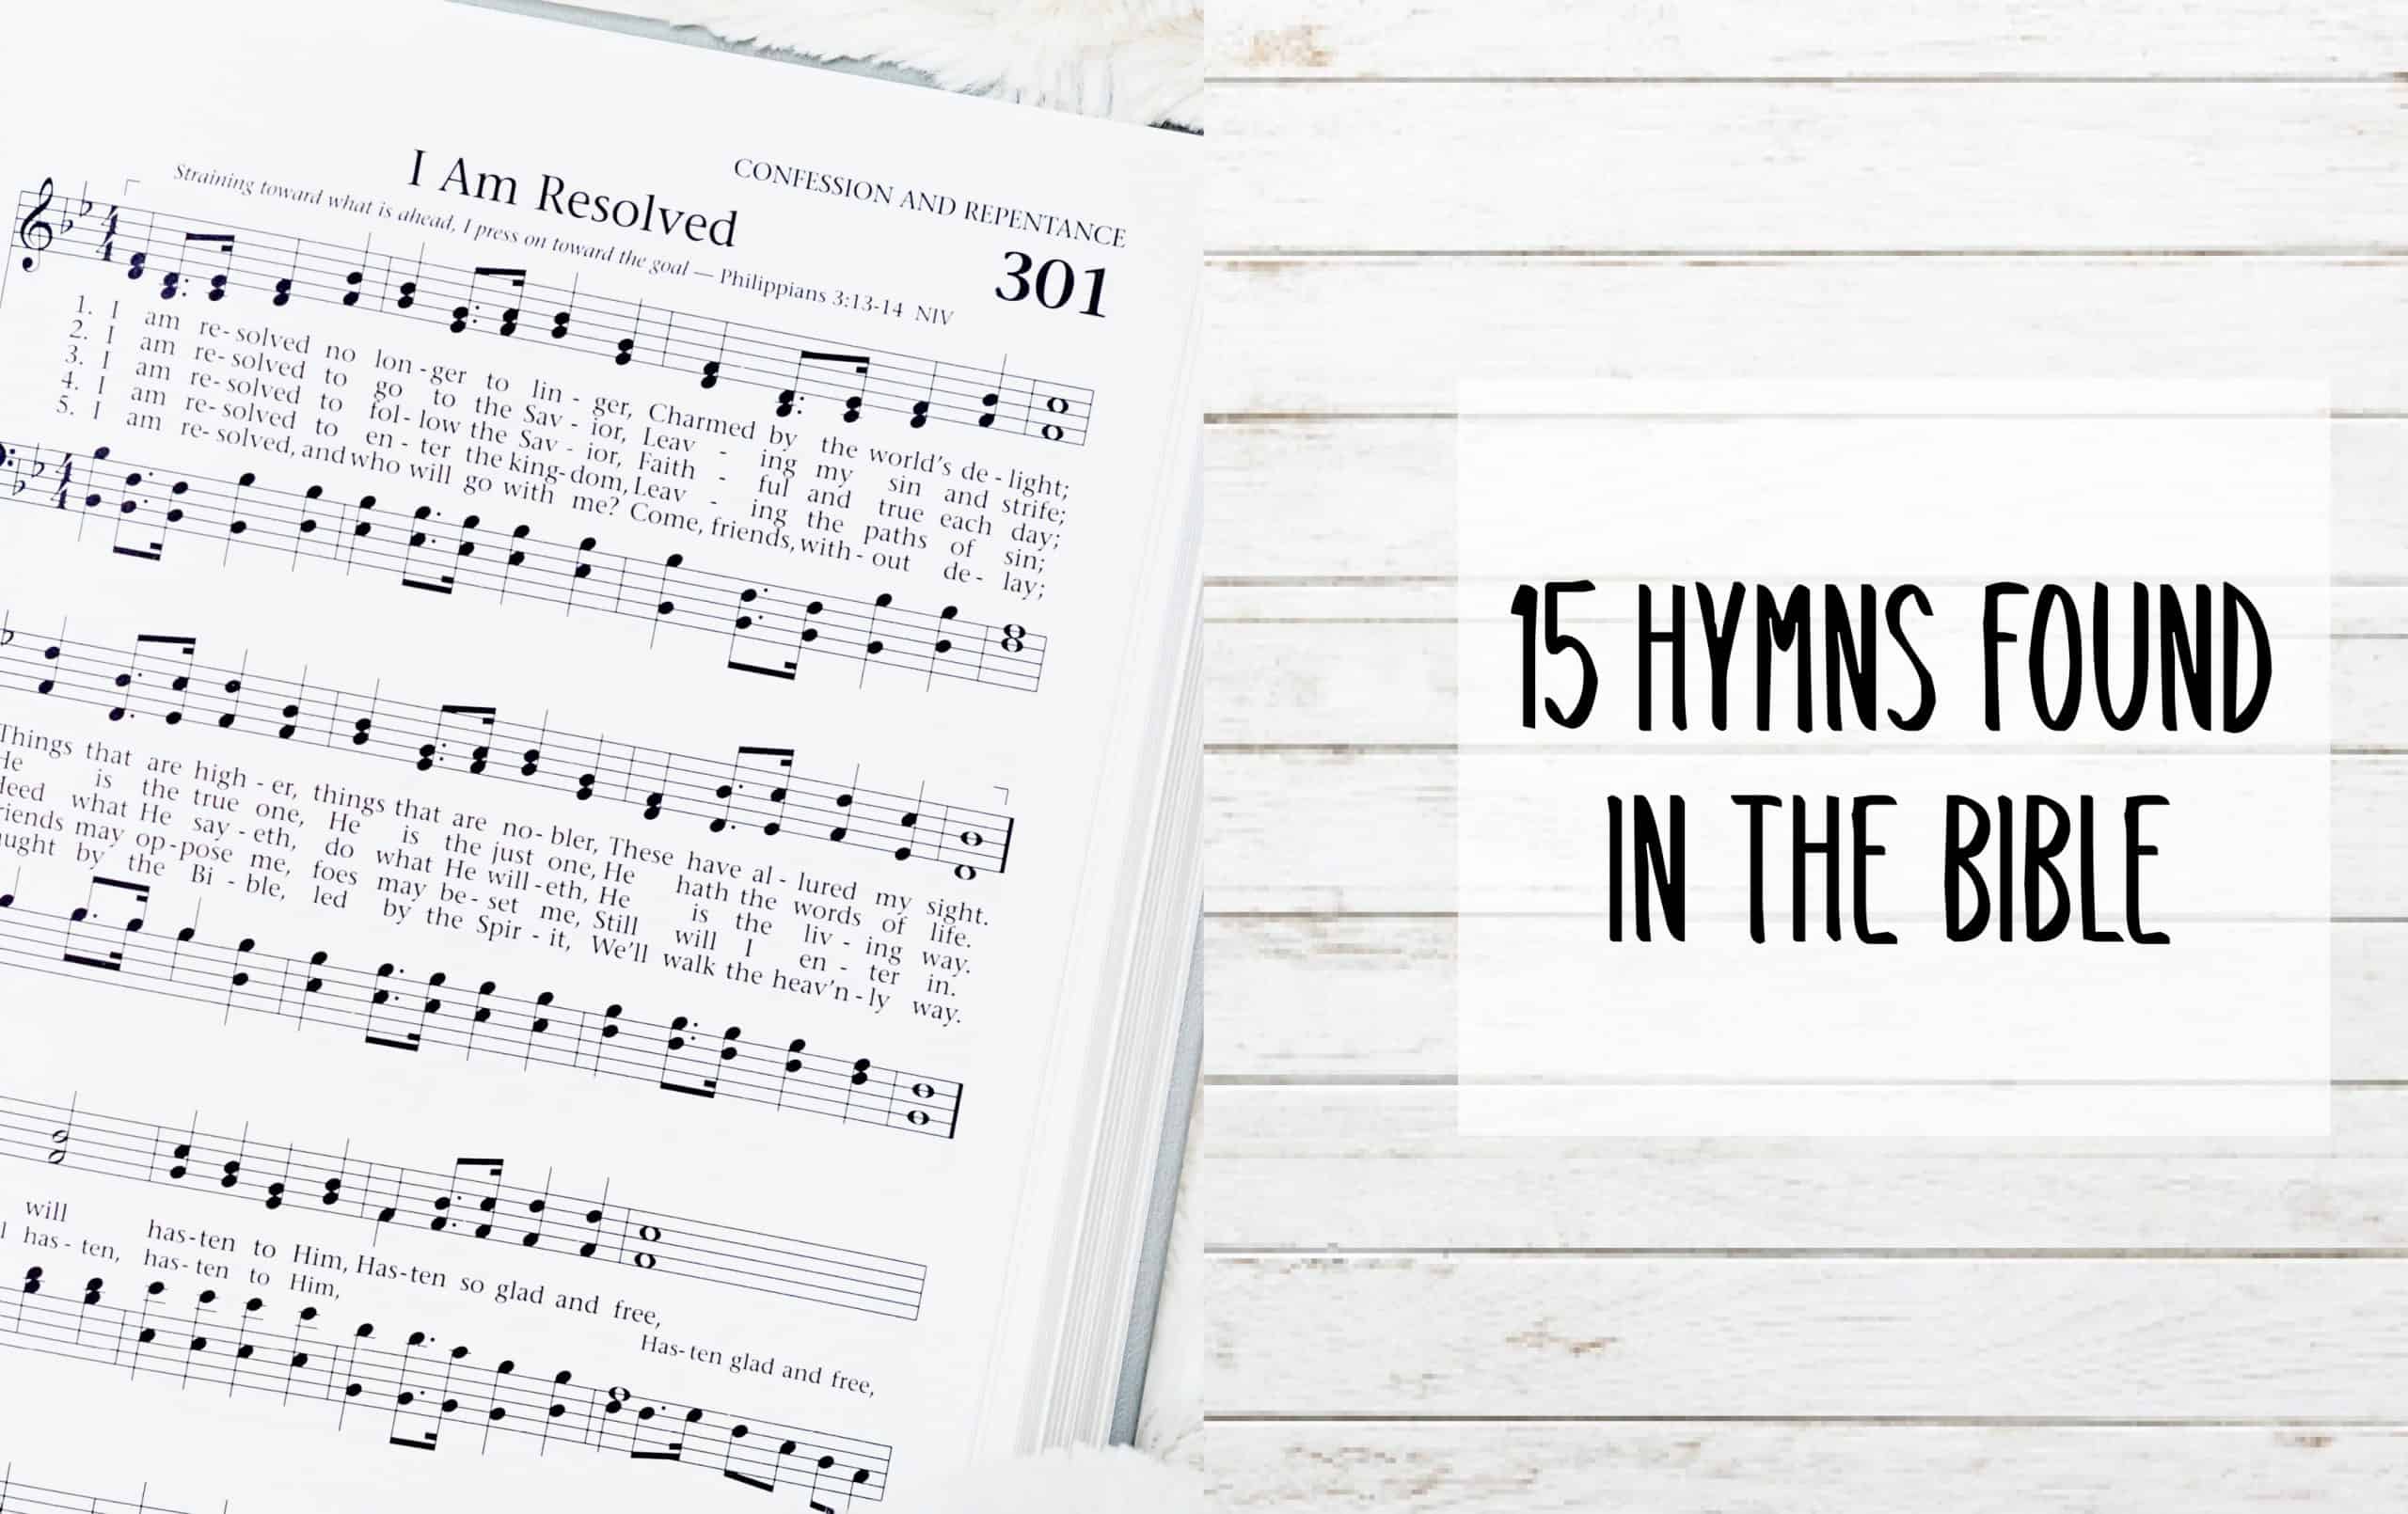 15 Hymns found in the bible